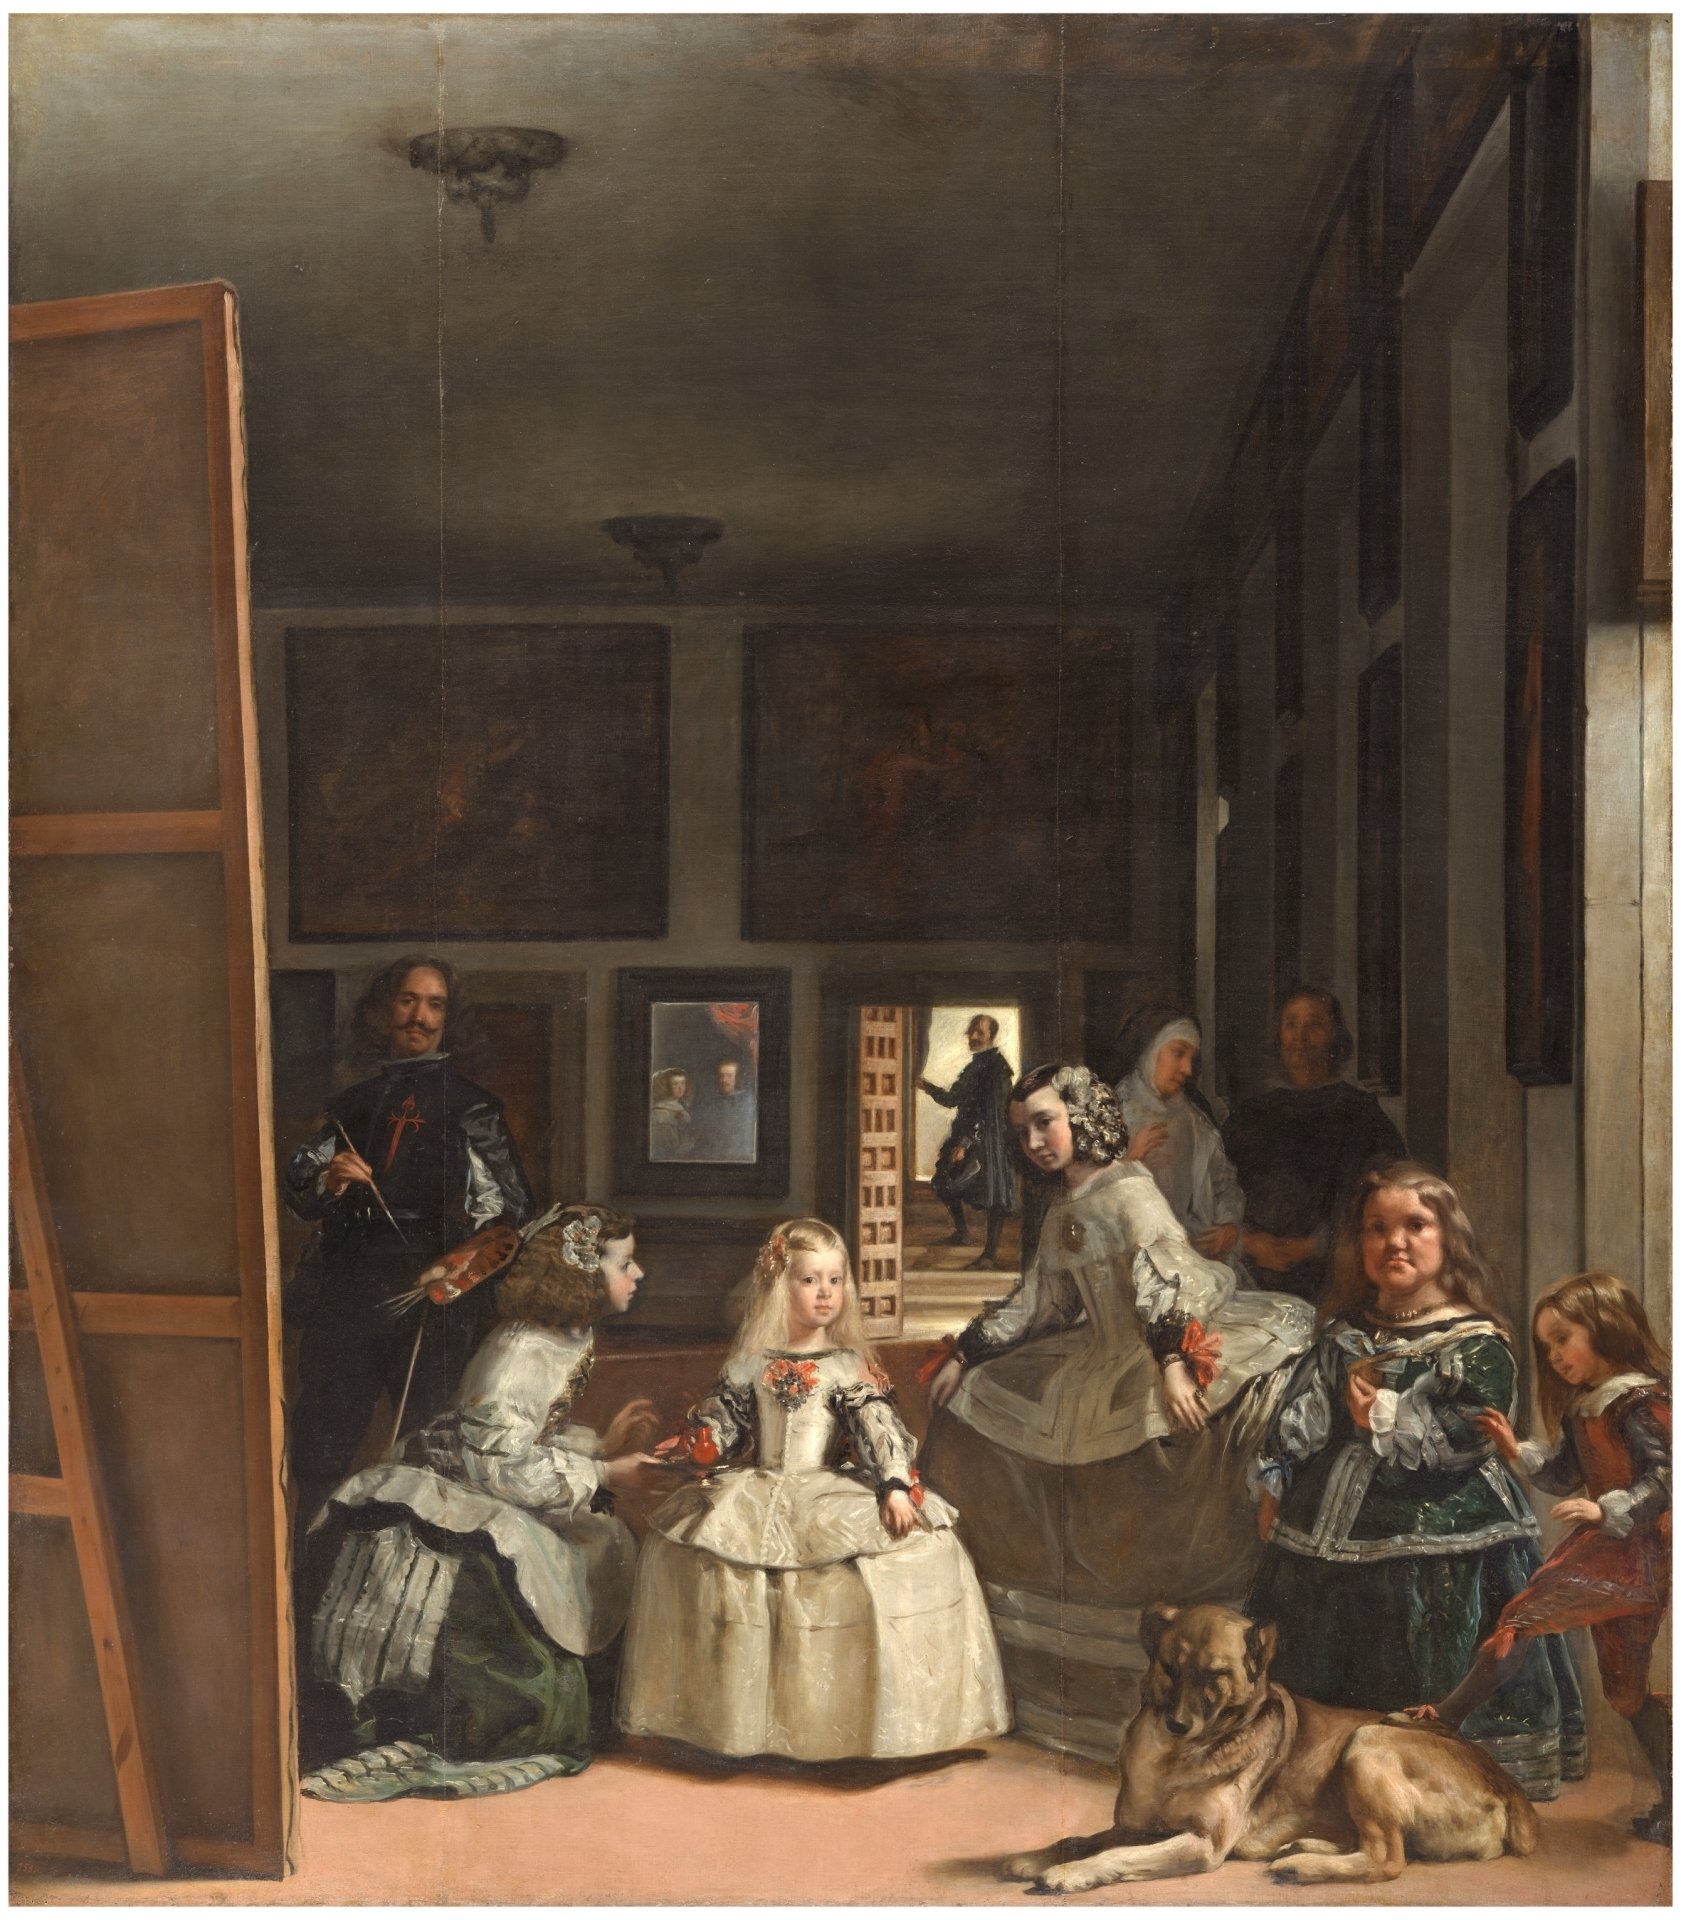 A painting of the five-year-old Infanta Margaret Theresa is surrounded by her entourage of maids, chaperone, bodyguard, two dwarfs and a dog.